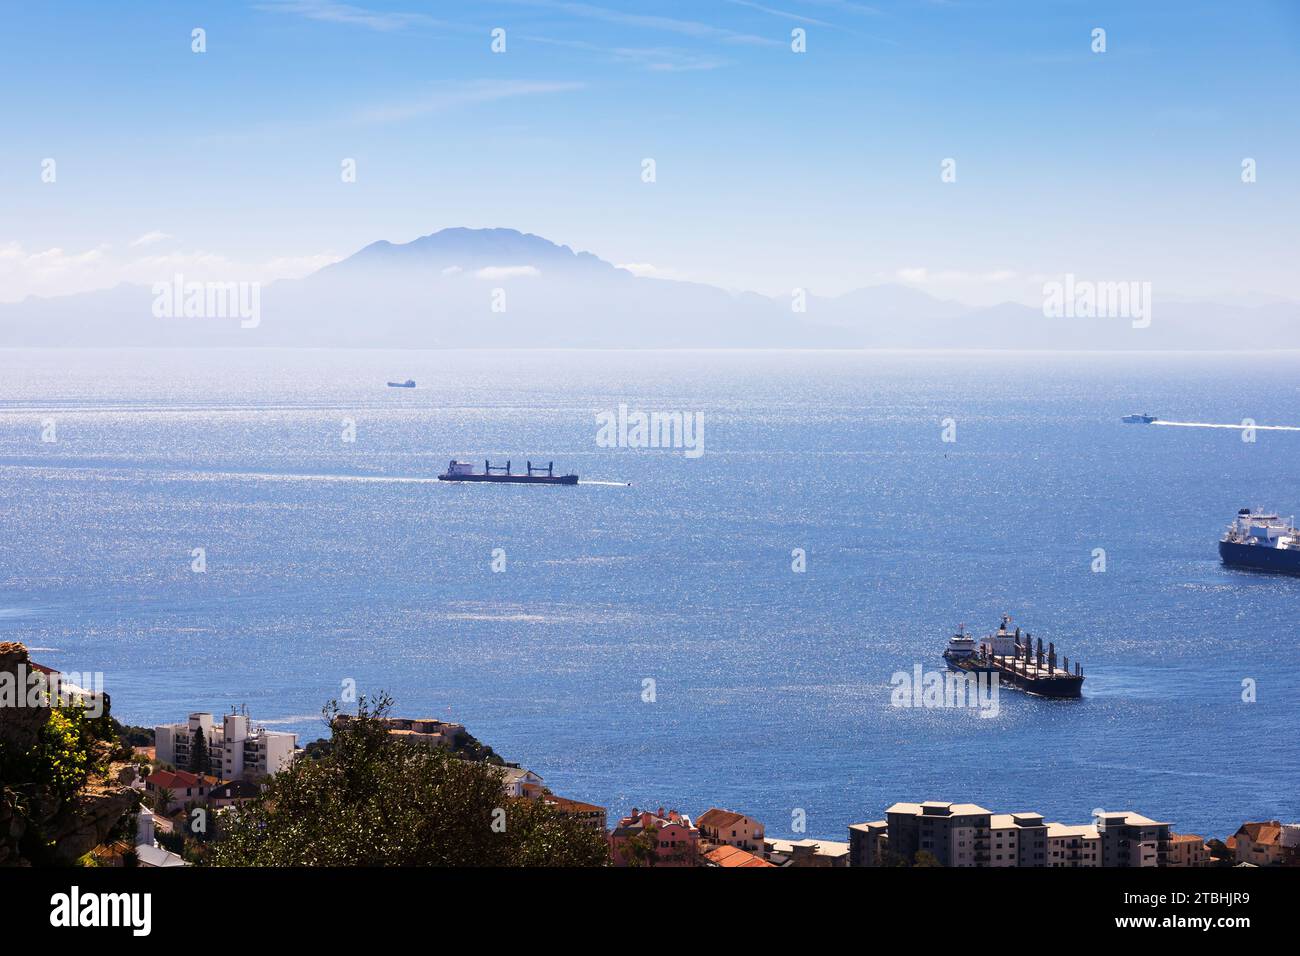 Ships transit through the Straight of Gibraltar with Jebel Musa in Morocco, Africa in view. The British Overseas Territory of Gibraltar, the Rock of G Stock Photo